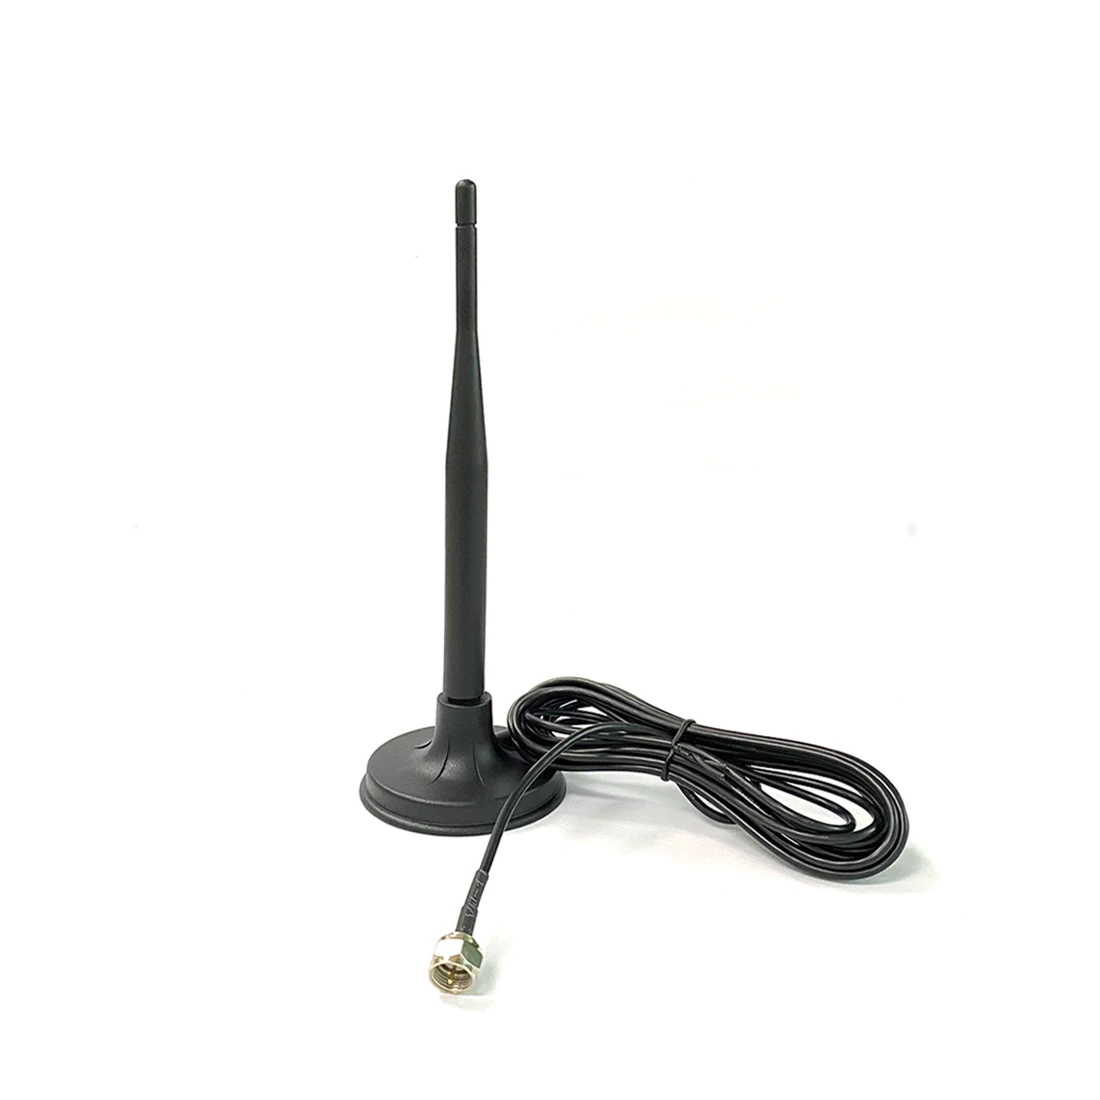 

DTMB/DVB-T2/ISDB TV Antenna 5dbi with 5m Extension Cable F Male Connector For Radio TV